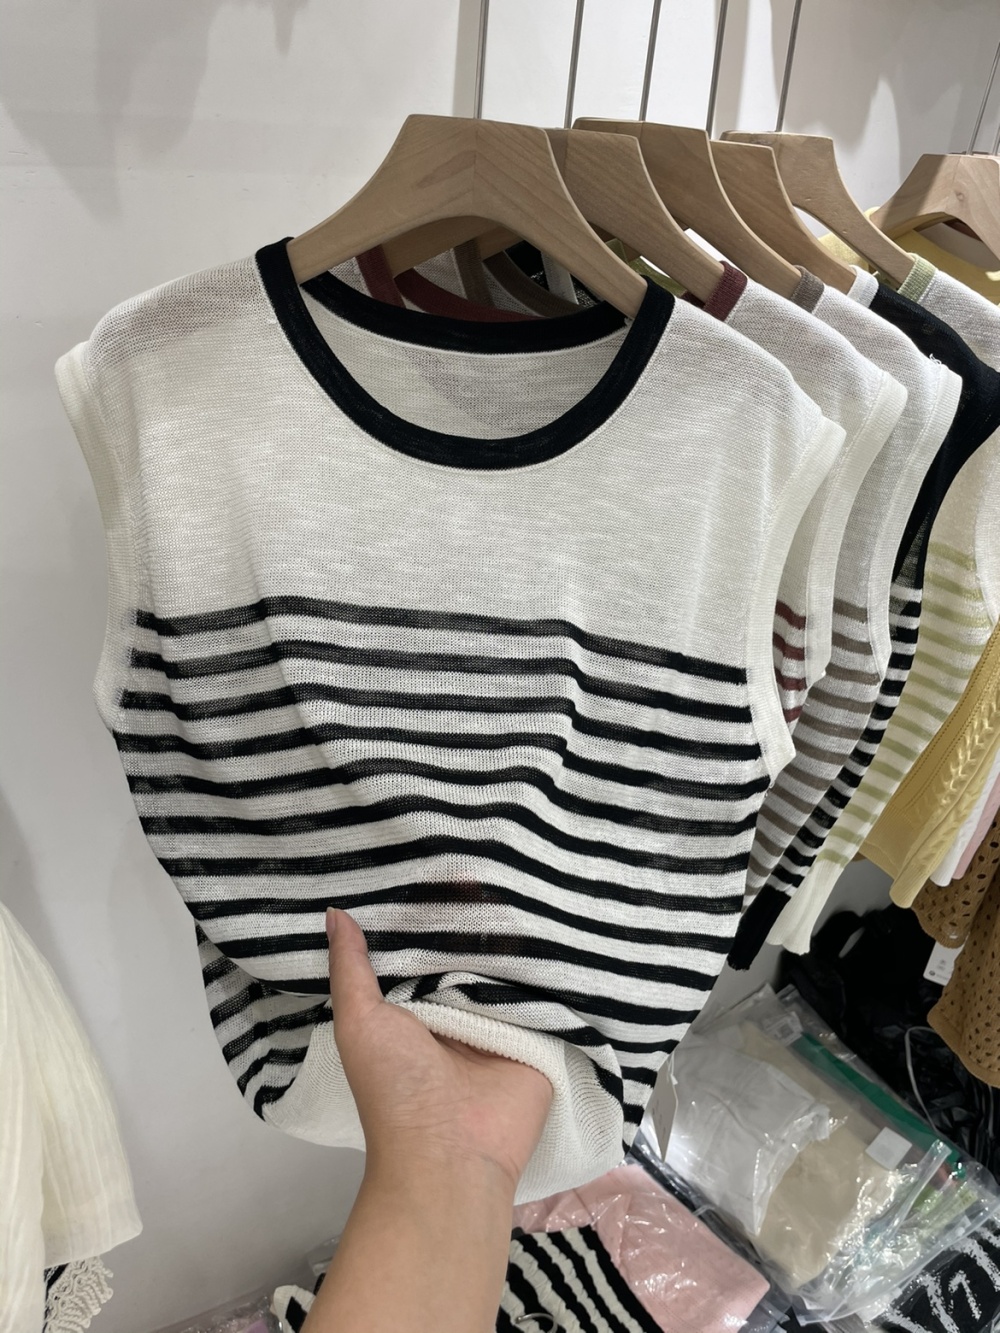 Mixed colors tops short sleeve sweater for women